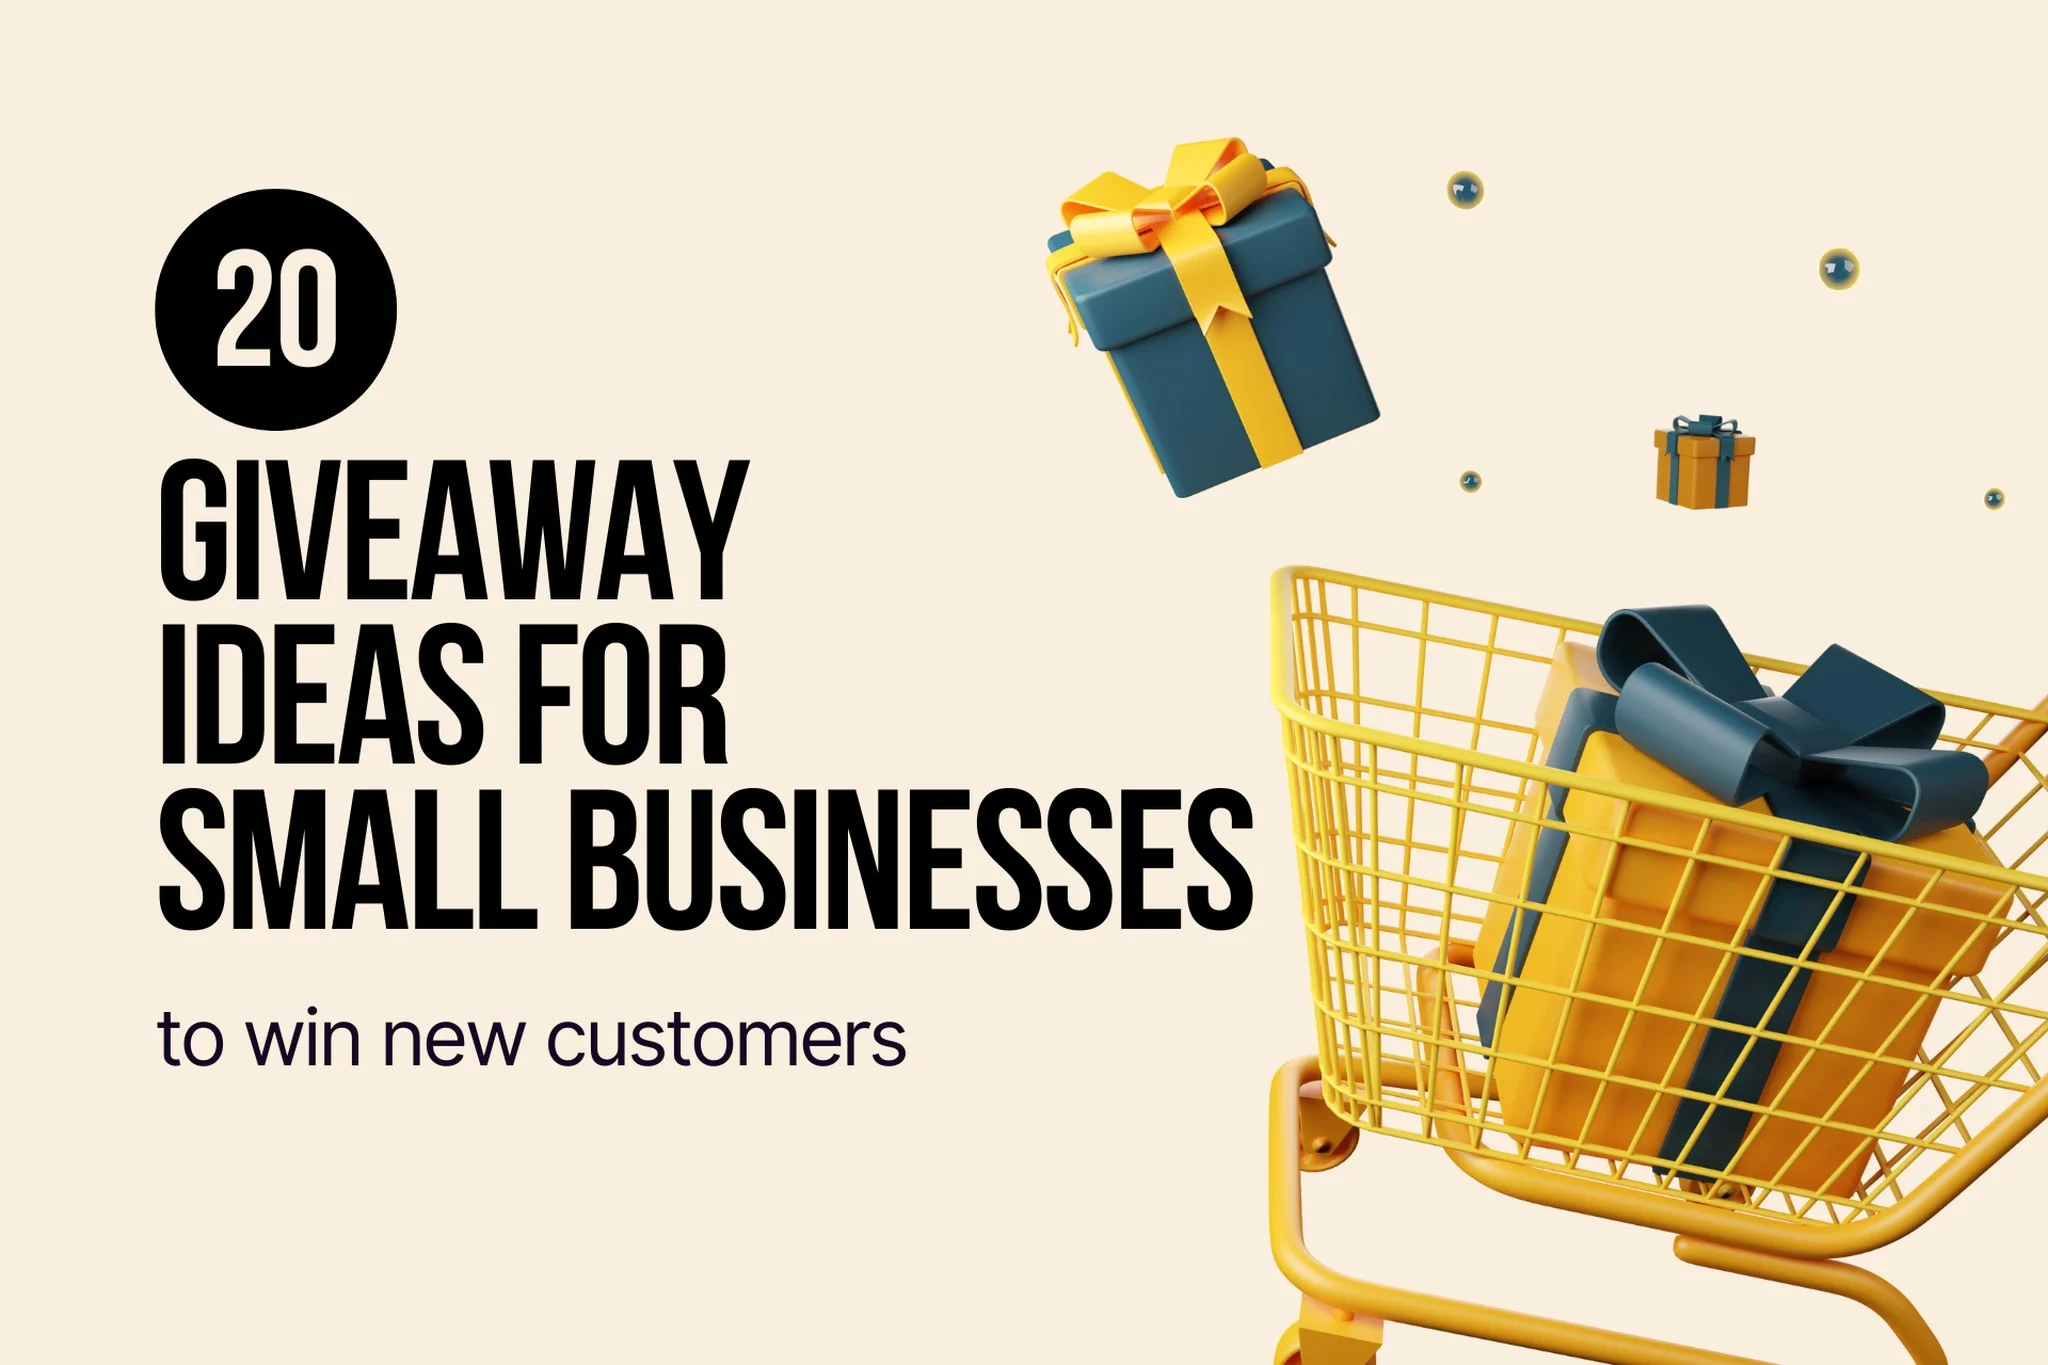 18 giveaway ideas for small businesses. - OrigamiGlobe